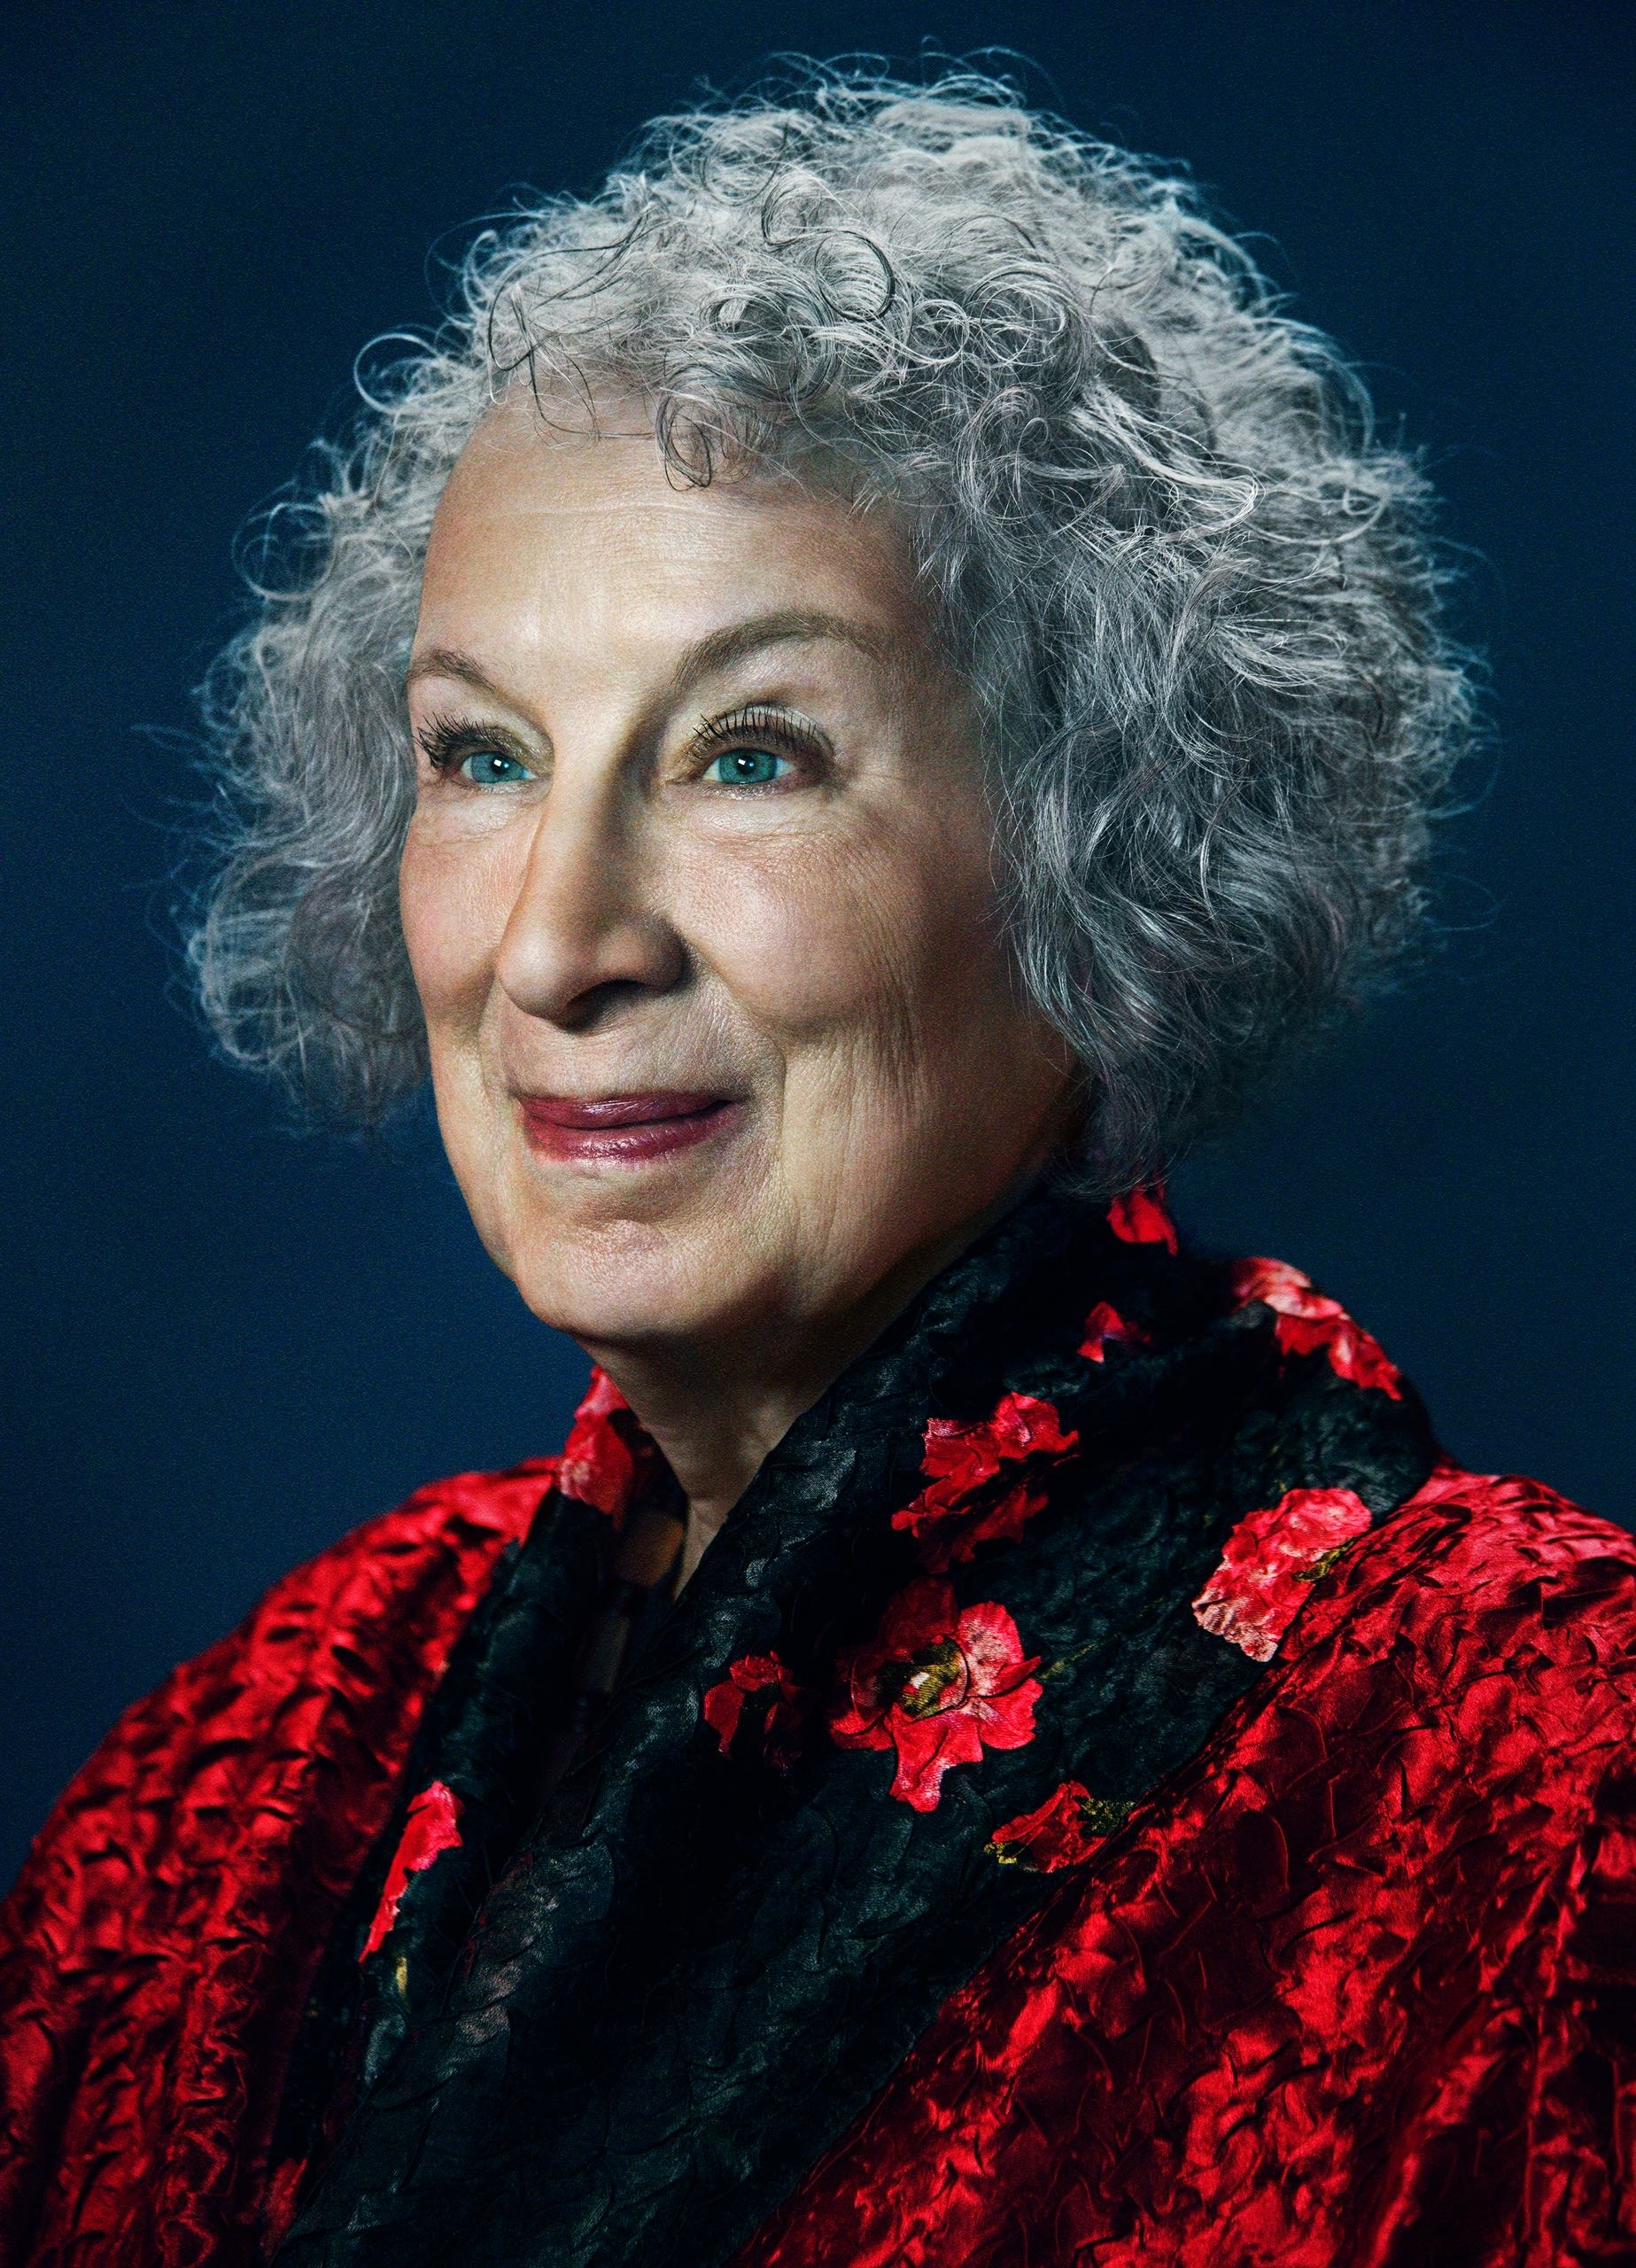 Margaret Atwood portrait for The New Yorker